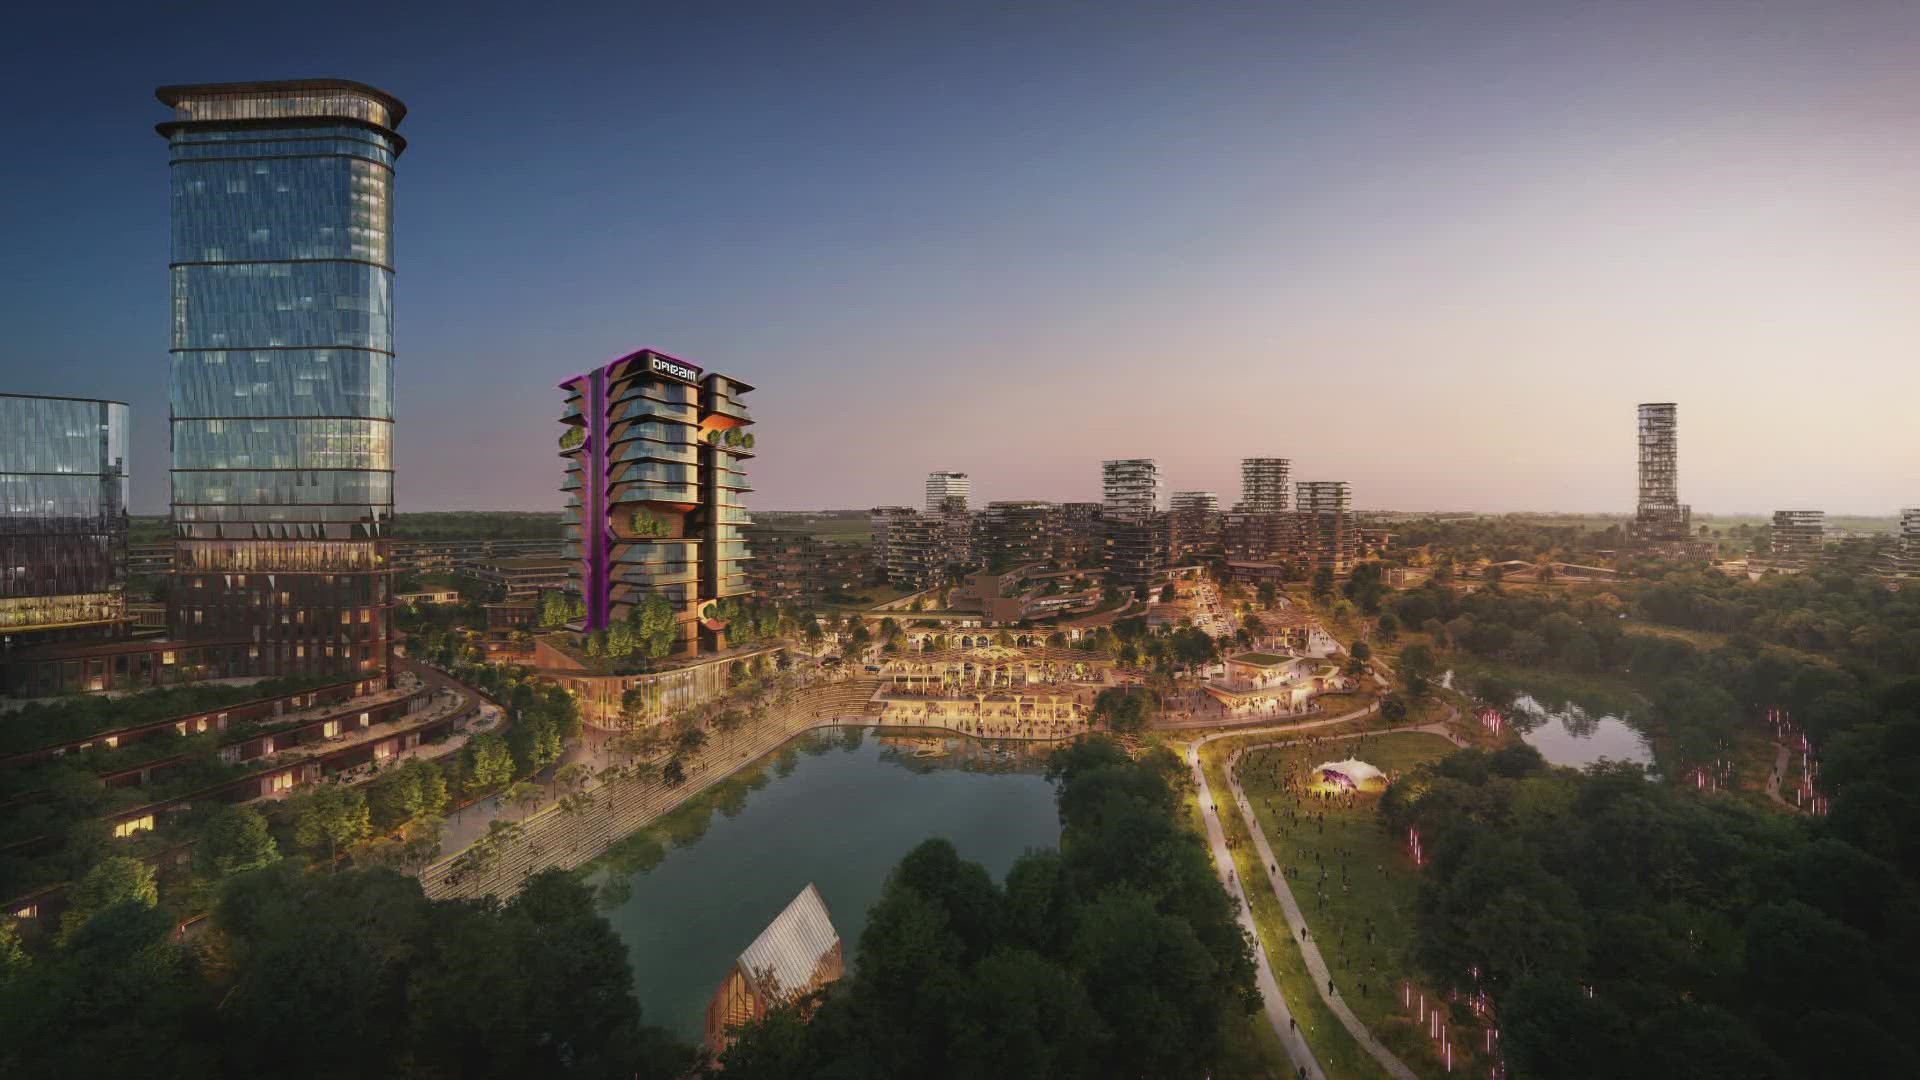 The 230-acre development, Firefly Park, will be built in Frisco, featuring numerous apartments, restaurants and retail locations.